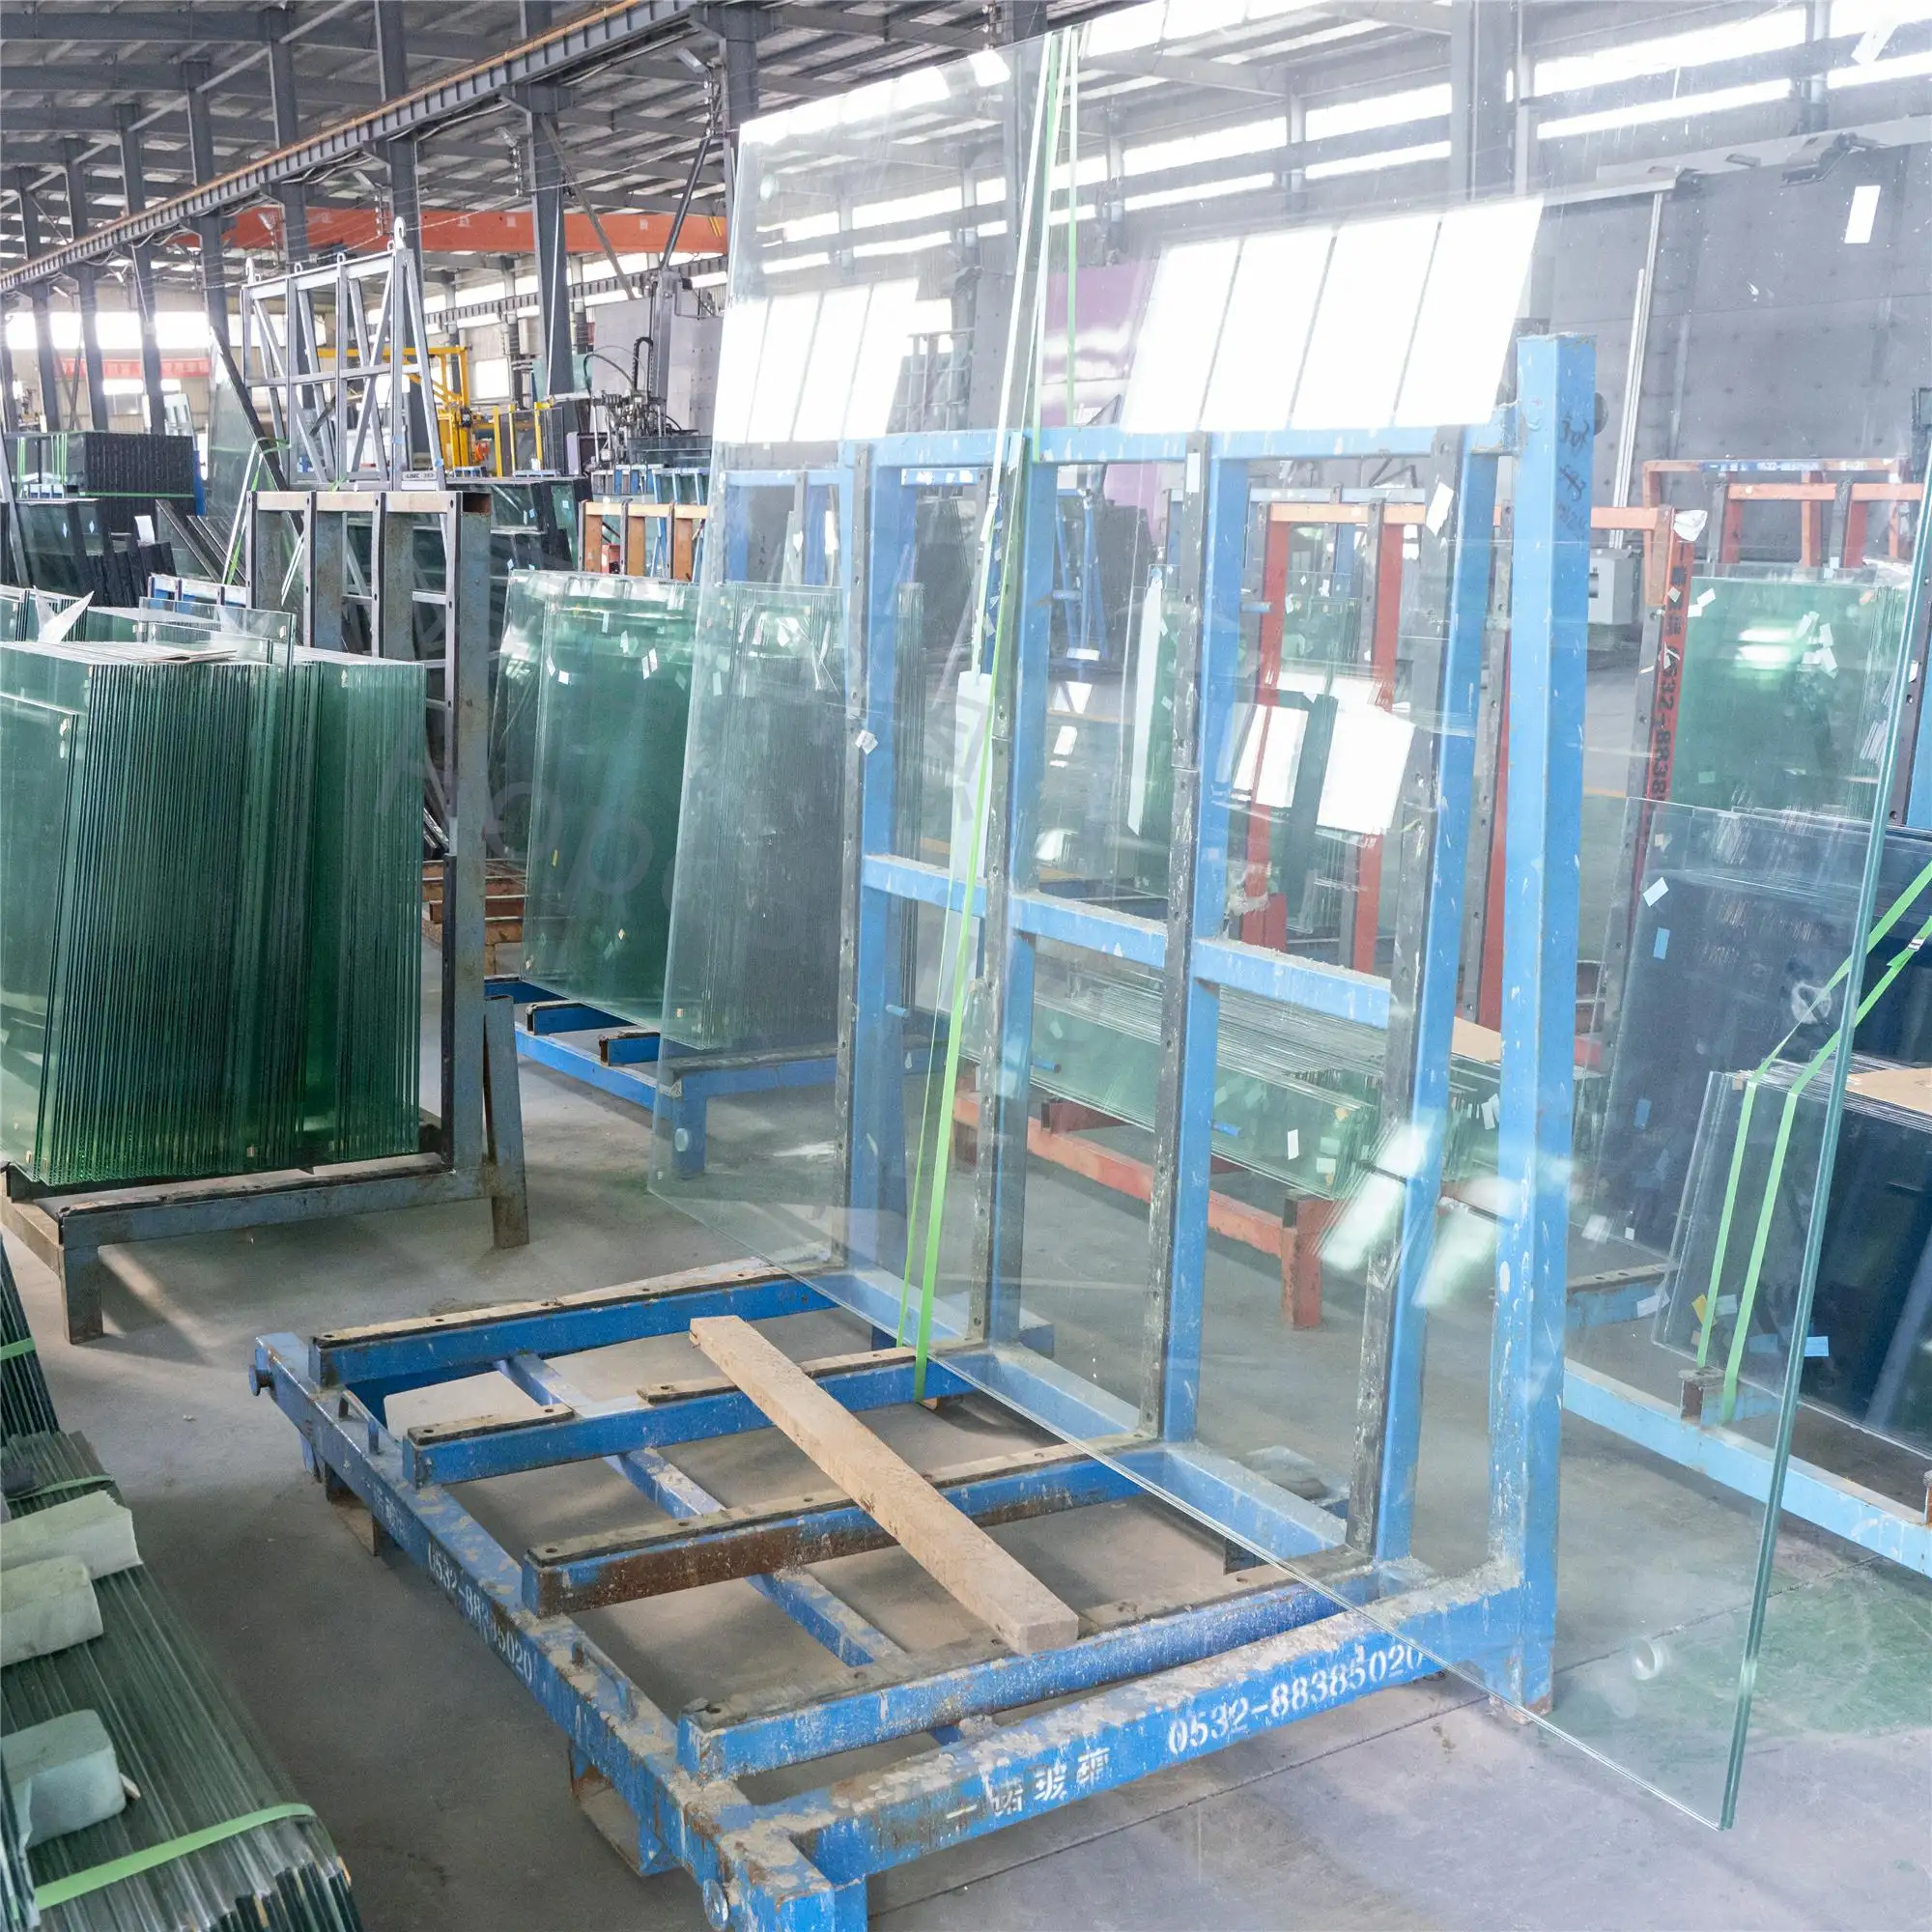 Glass Manufacturer Laminated Glass Semi Tempering Polyvinyl Butyral Film For Laminated Glass